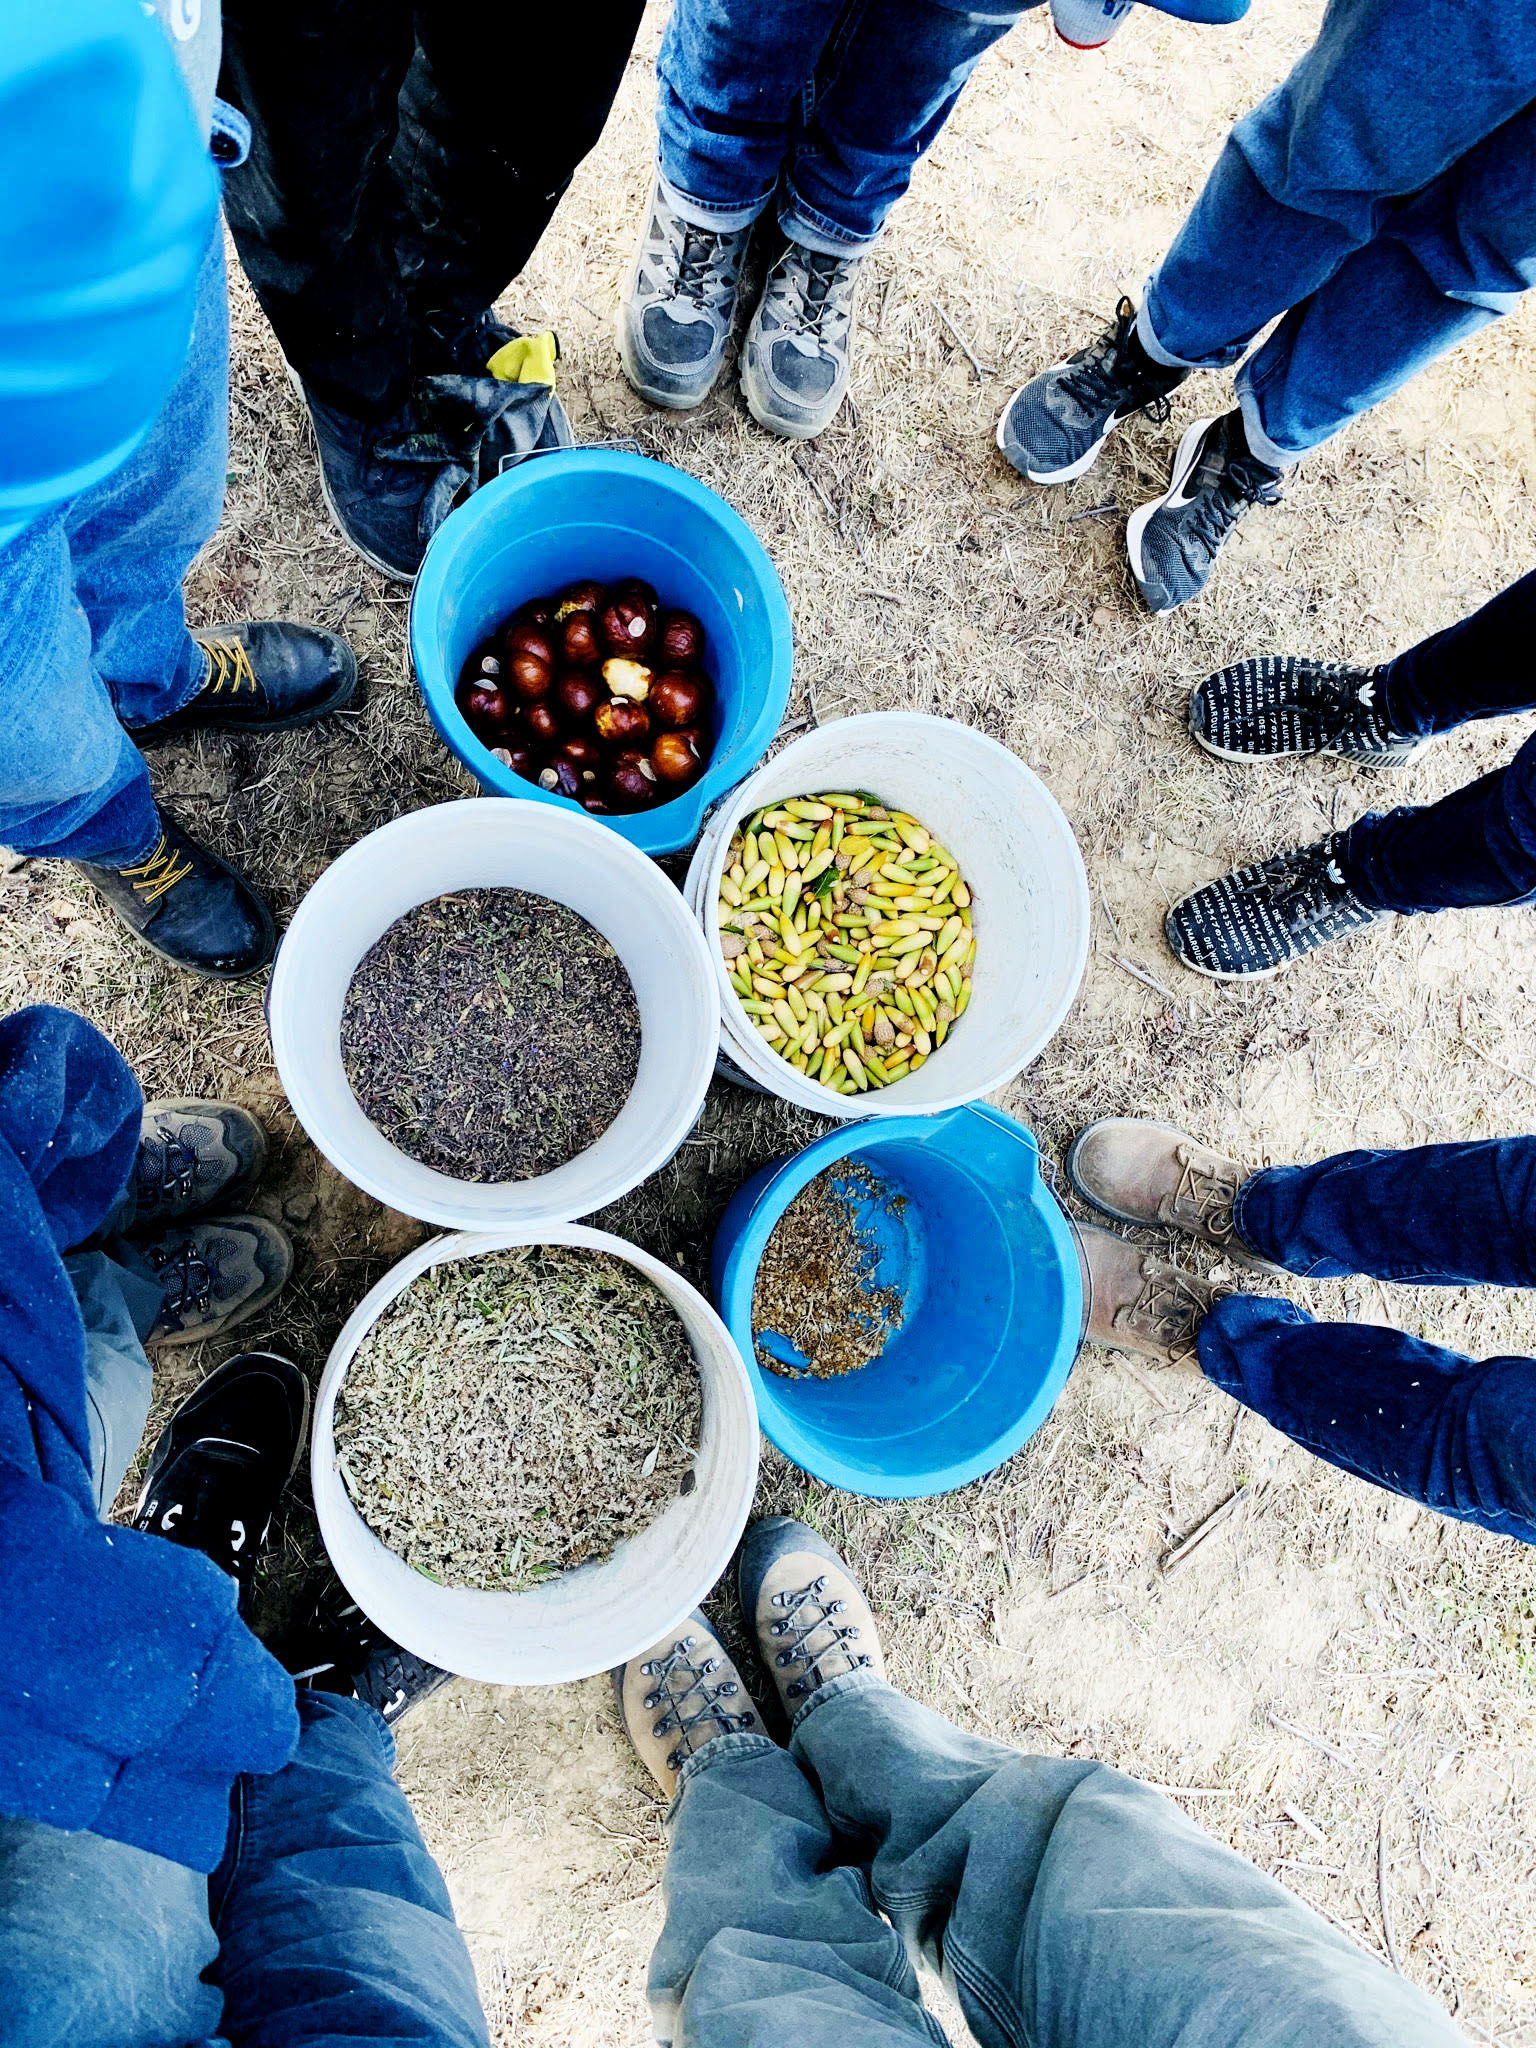 picture of interns feet in a circle gathered around seeds and acorns the team collected